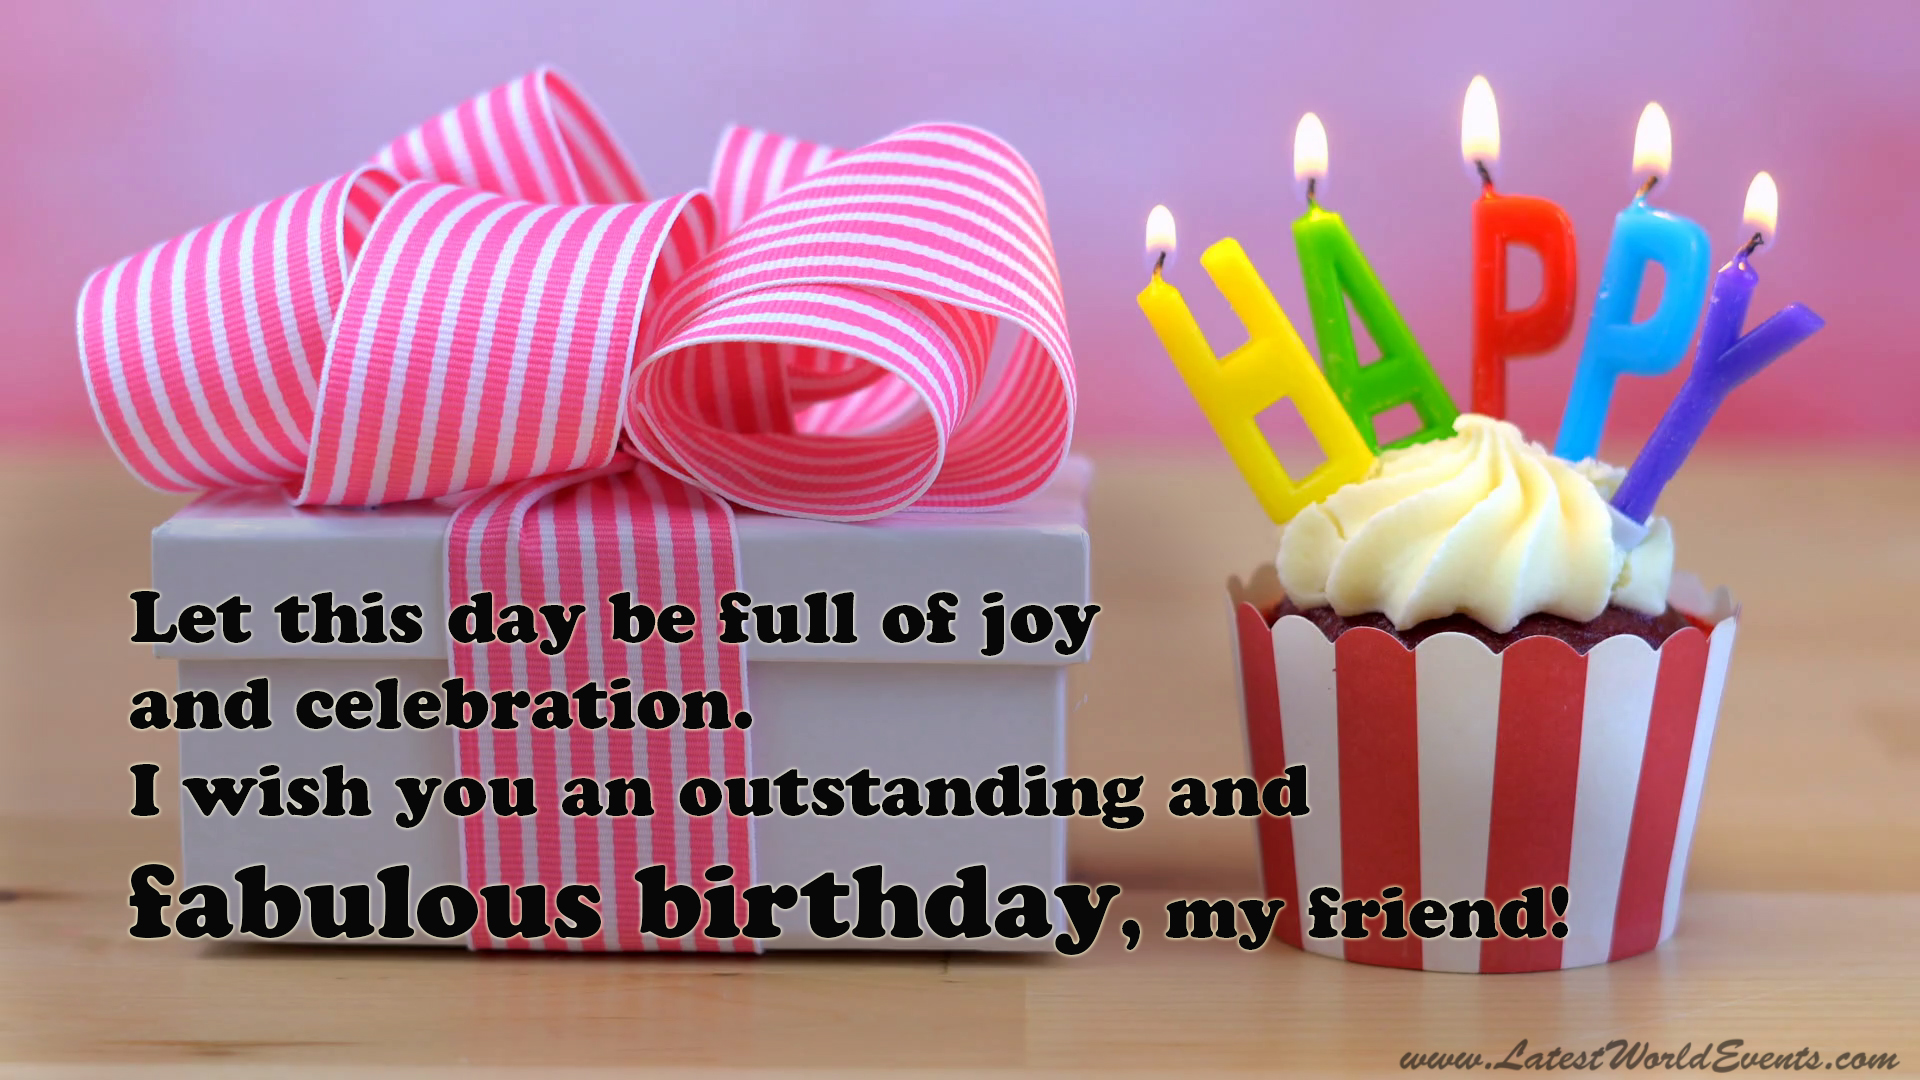 birthday-card-wishes-quotes-posters-1